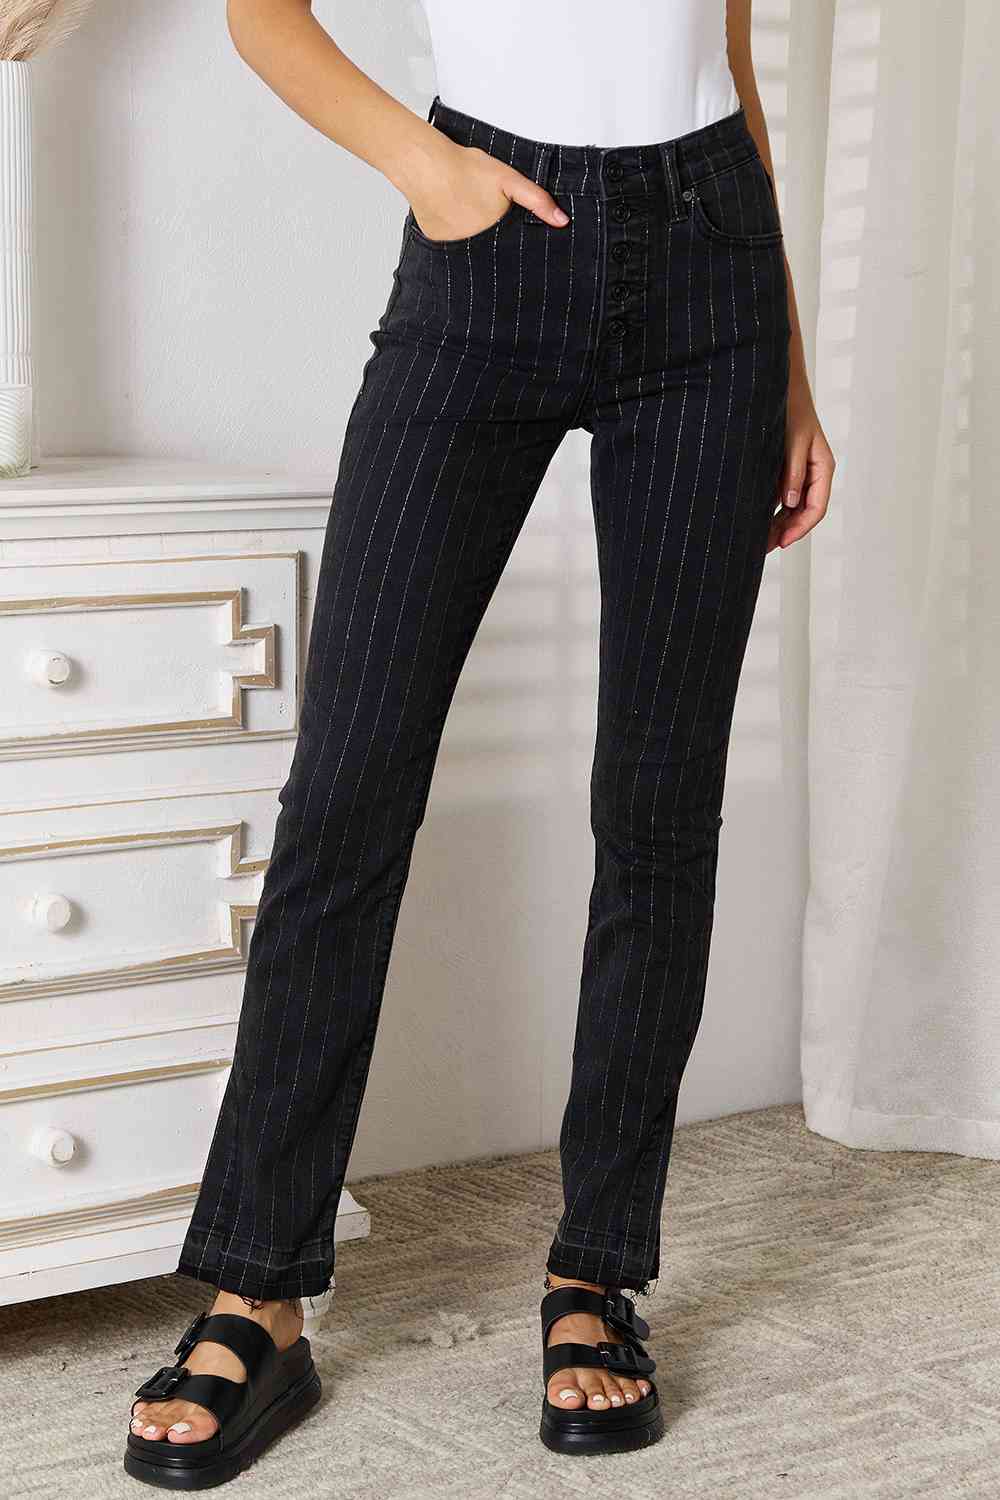 Gussie - Kancan Striped Pants with Pockets